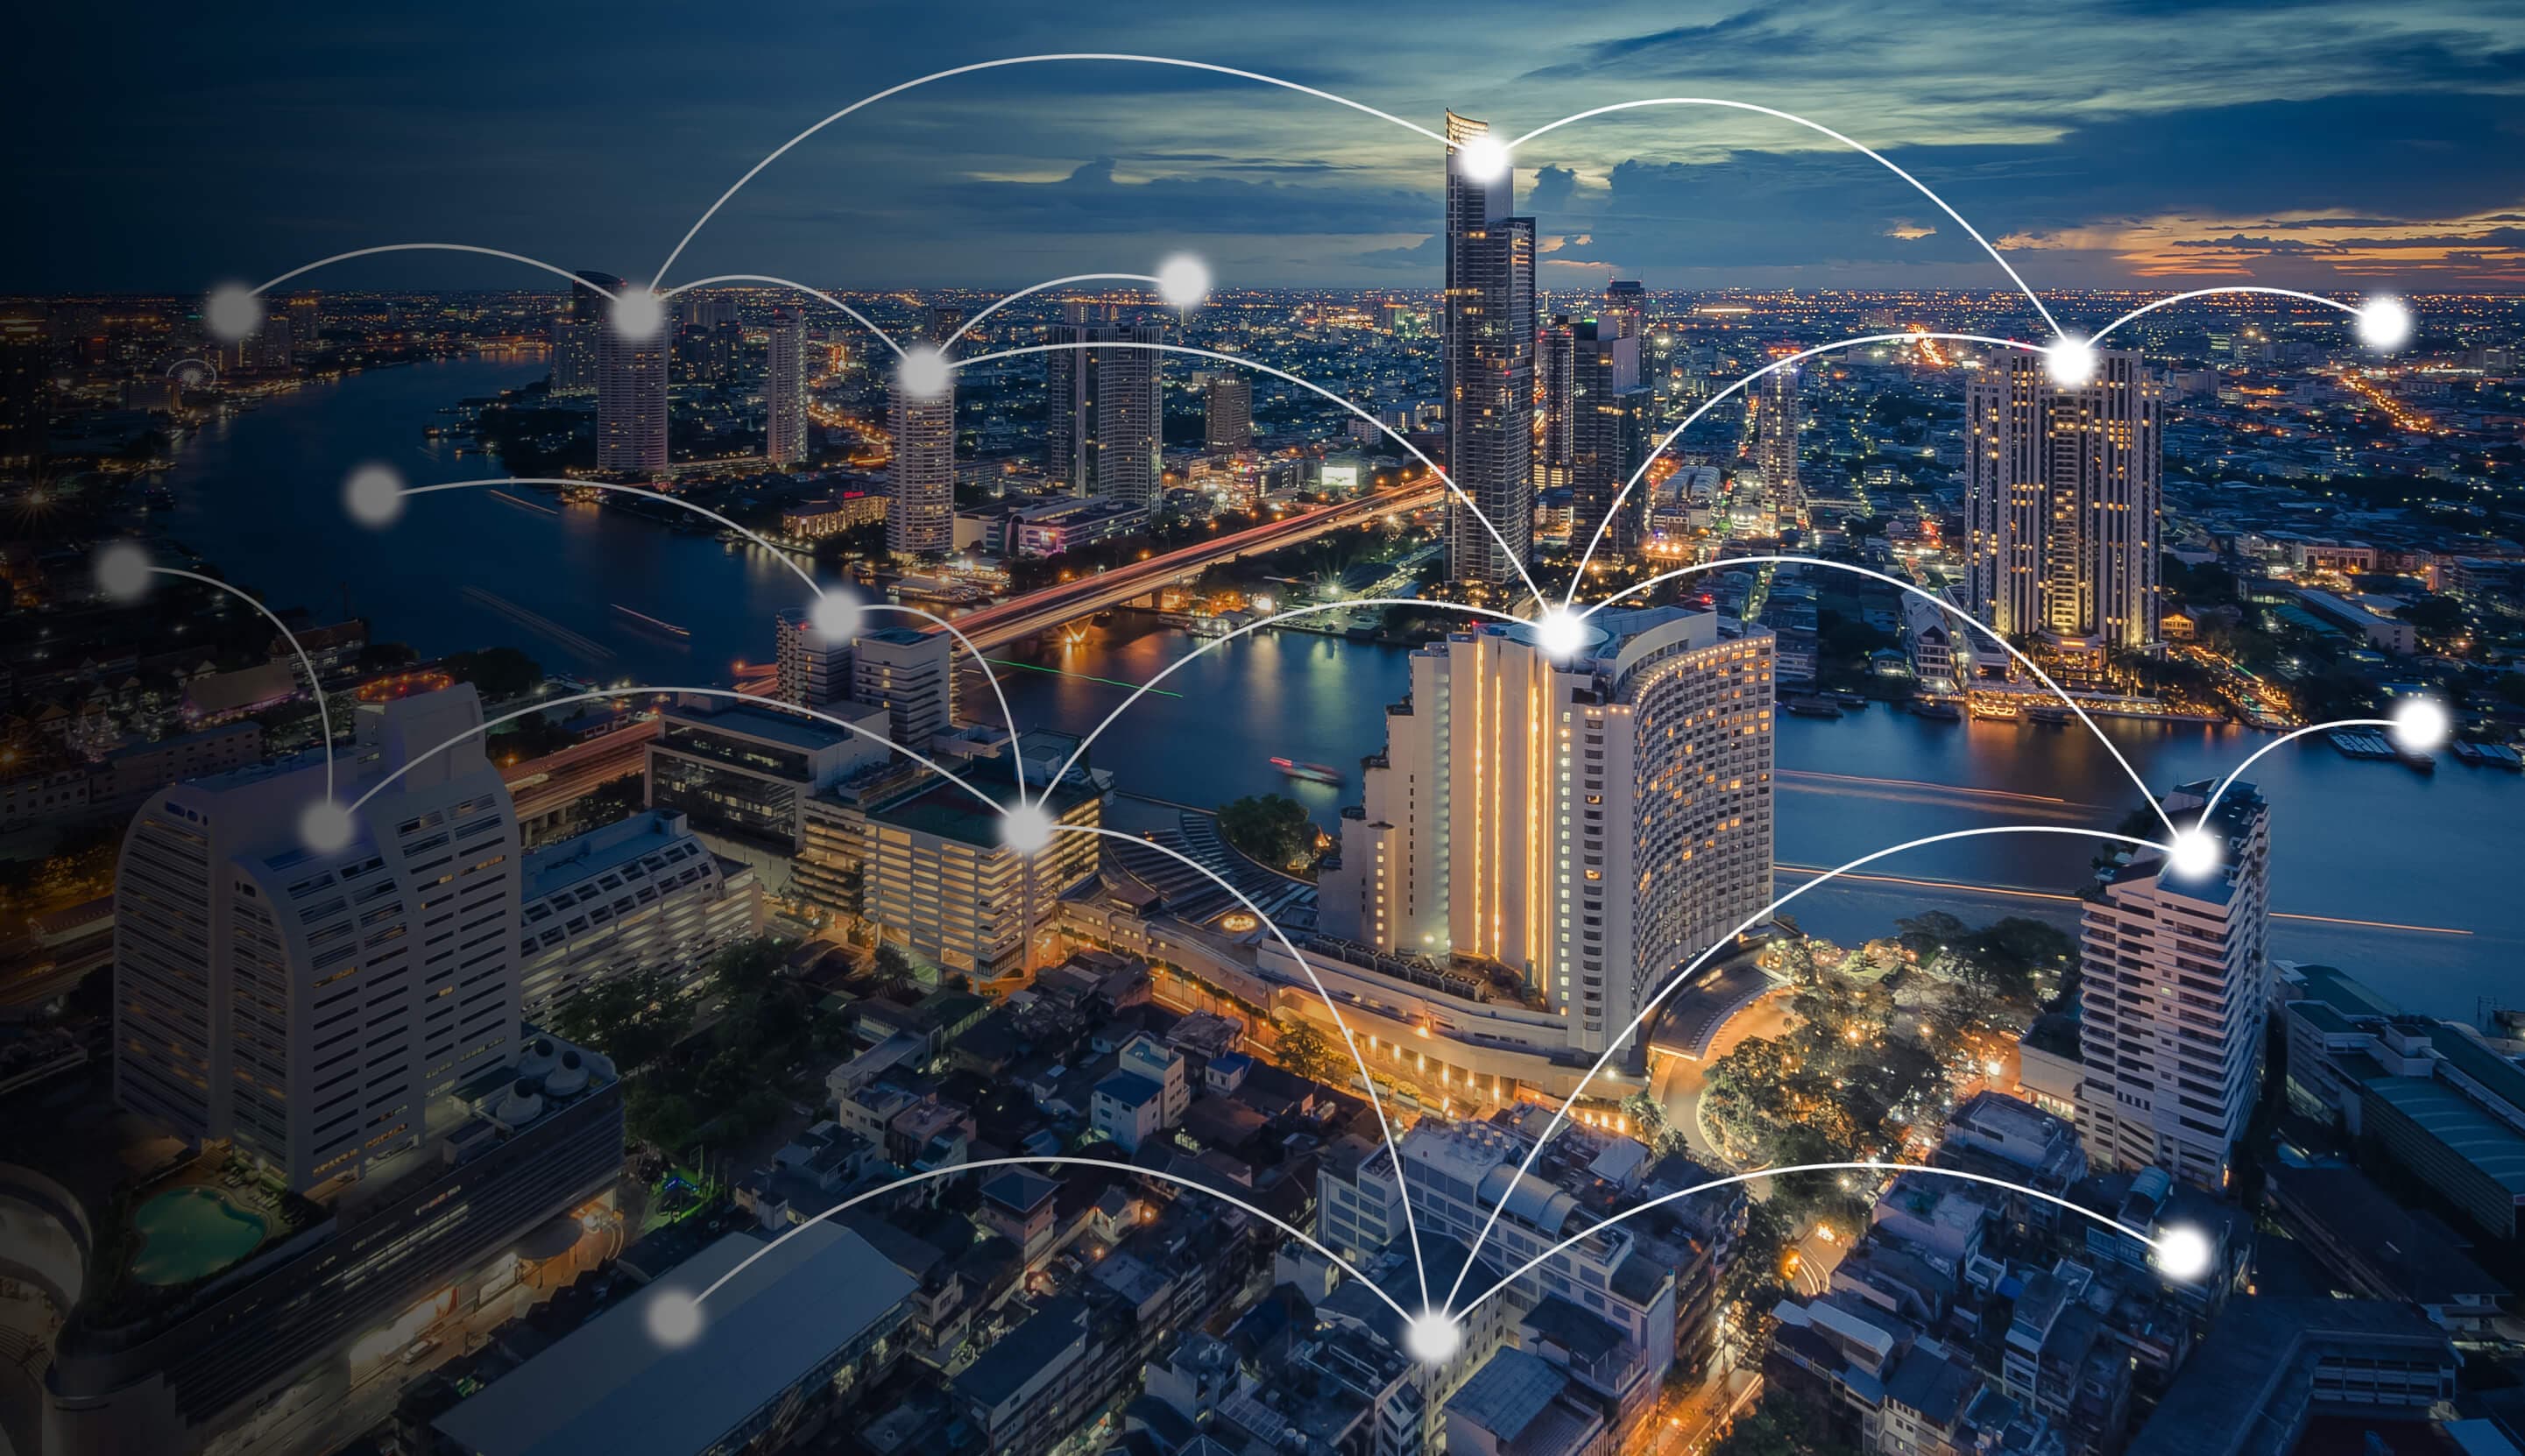 Building the <strong>gigabit cities</strong> of tomorrow.